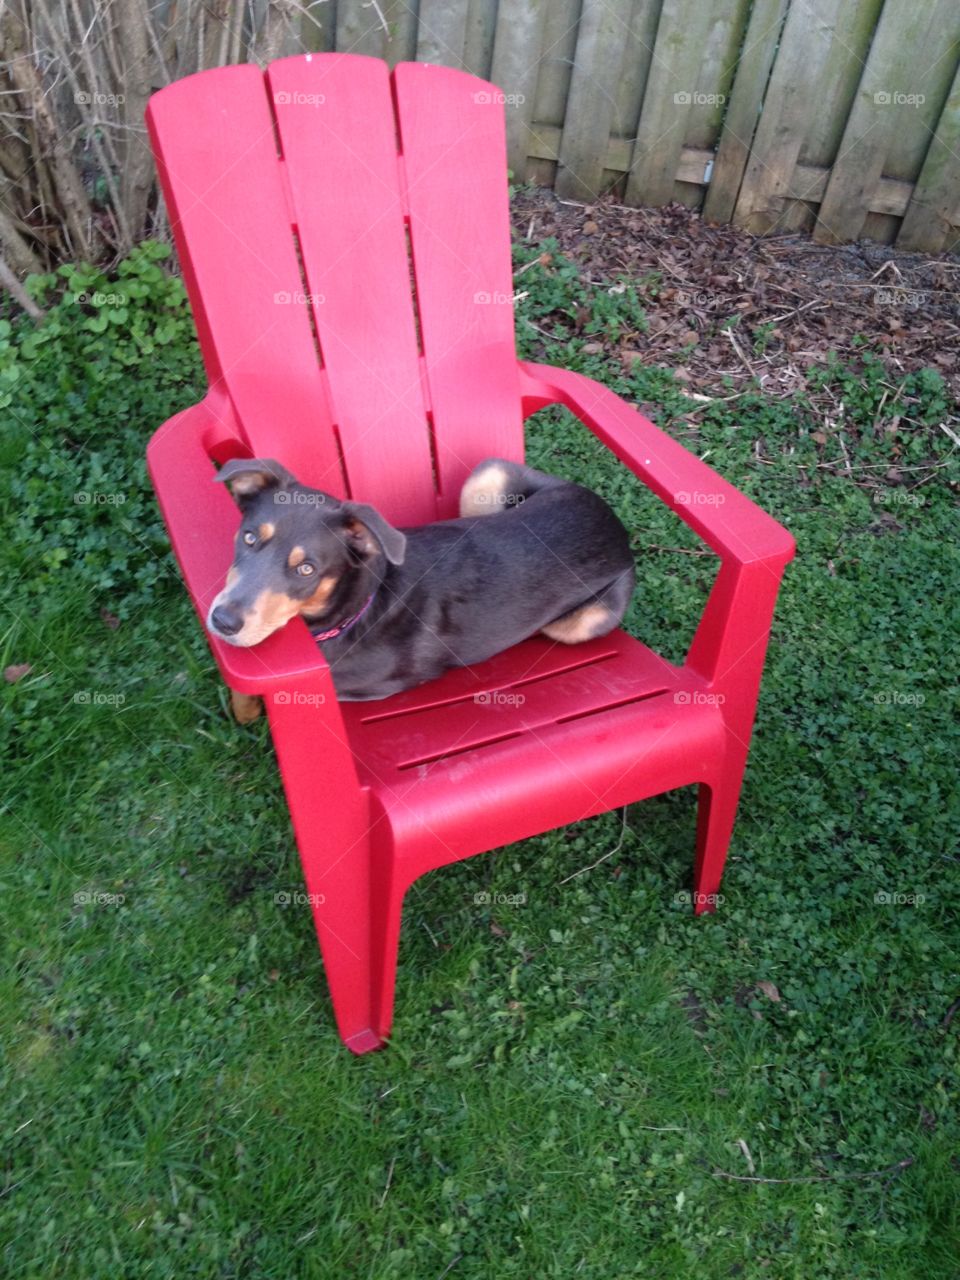 Cute dog sitting in master's red plastic garden patio chair.